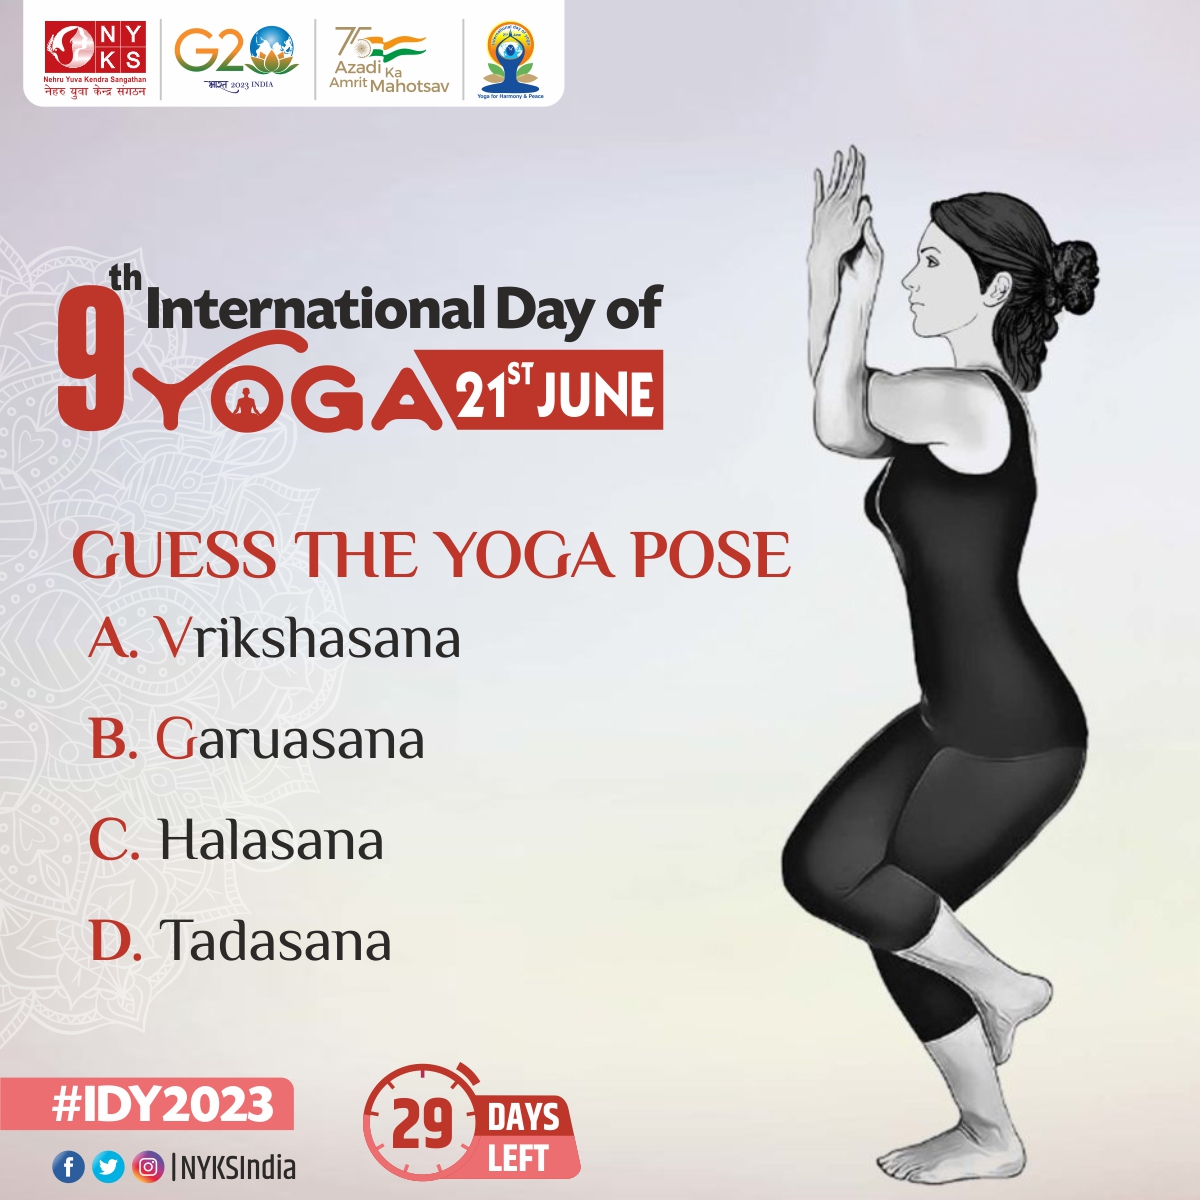 Test your knowledge! 

Can you guess the yoga pose?
Reply with your answer below and let's see who gets it right!

#NYKS4Yoga #IDY2023 #Yoga #quiz